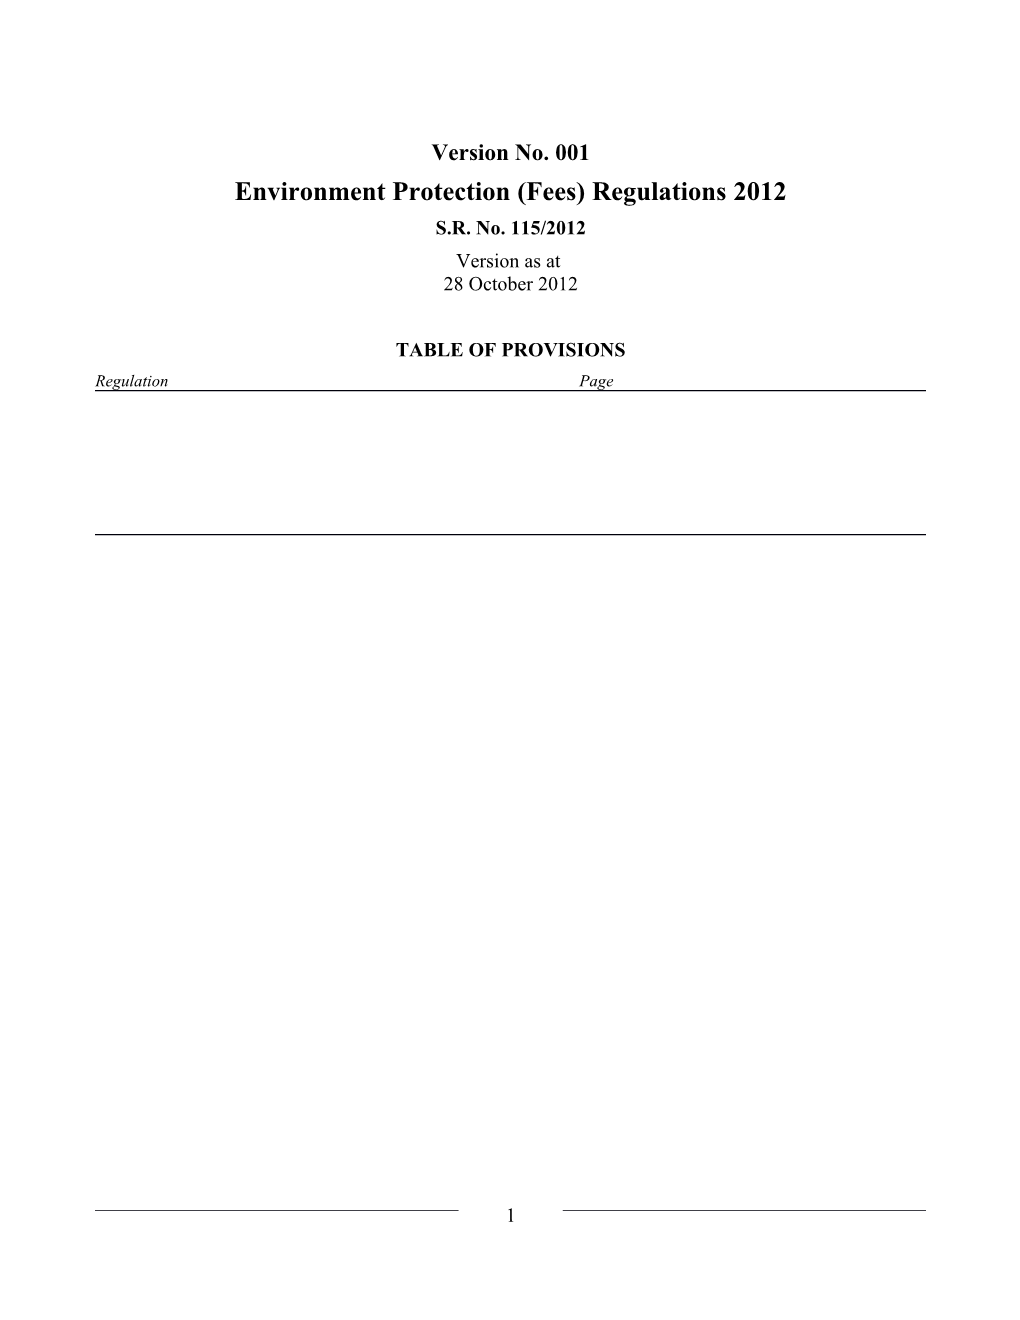 Environment Protection (Fees) Regulations 2012